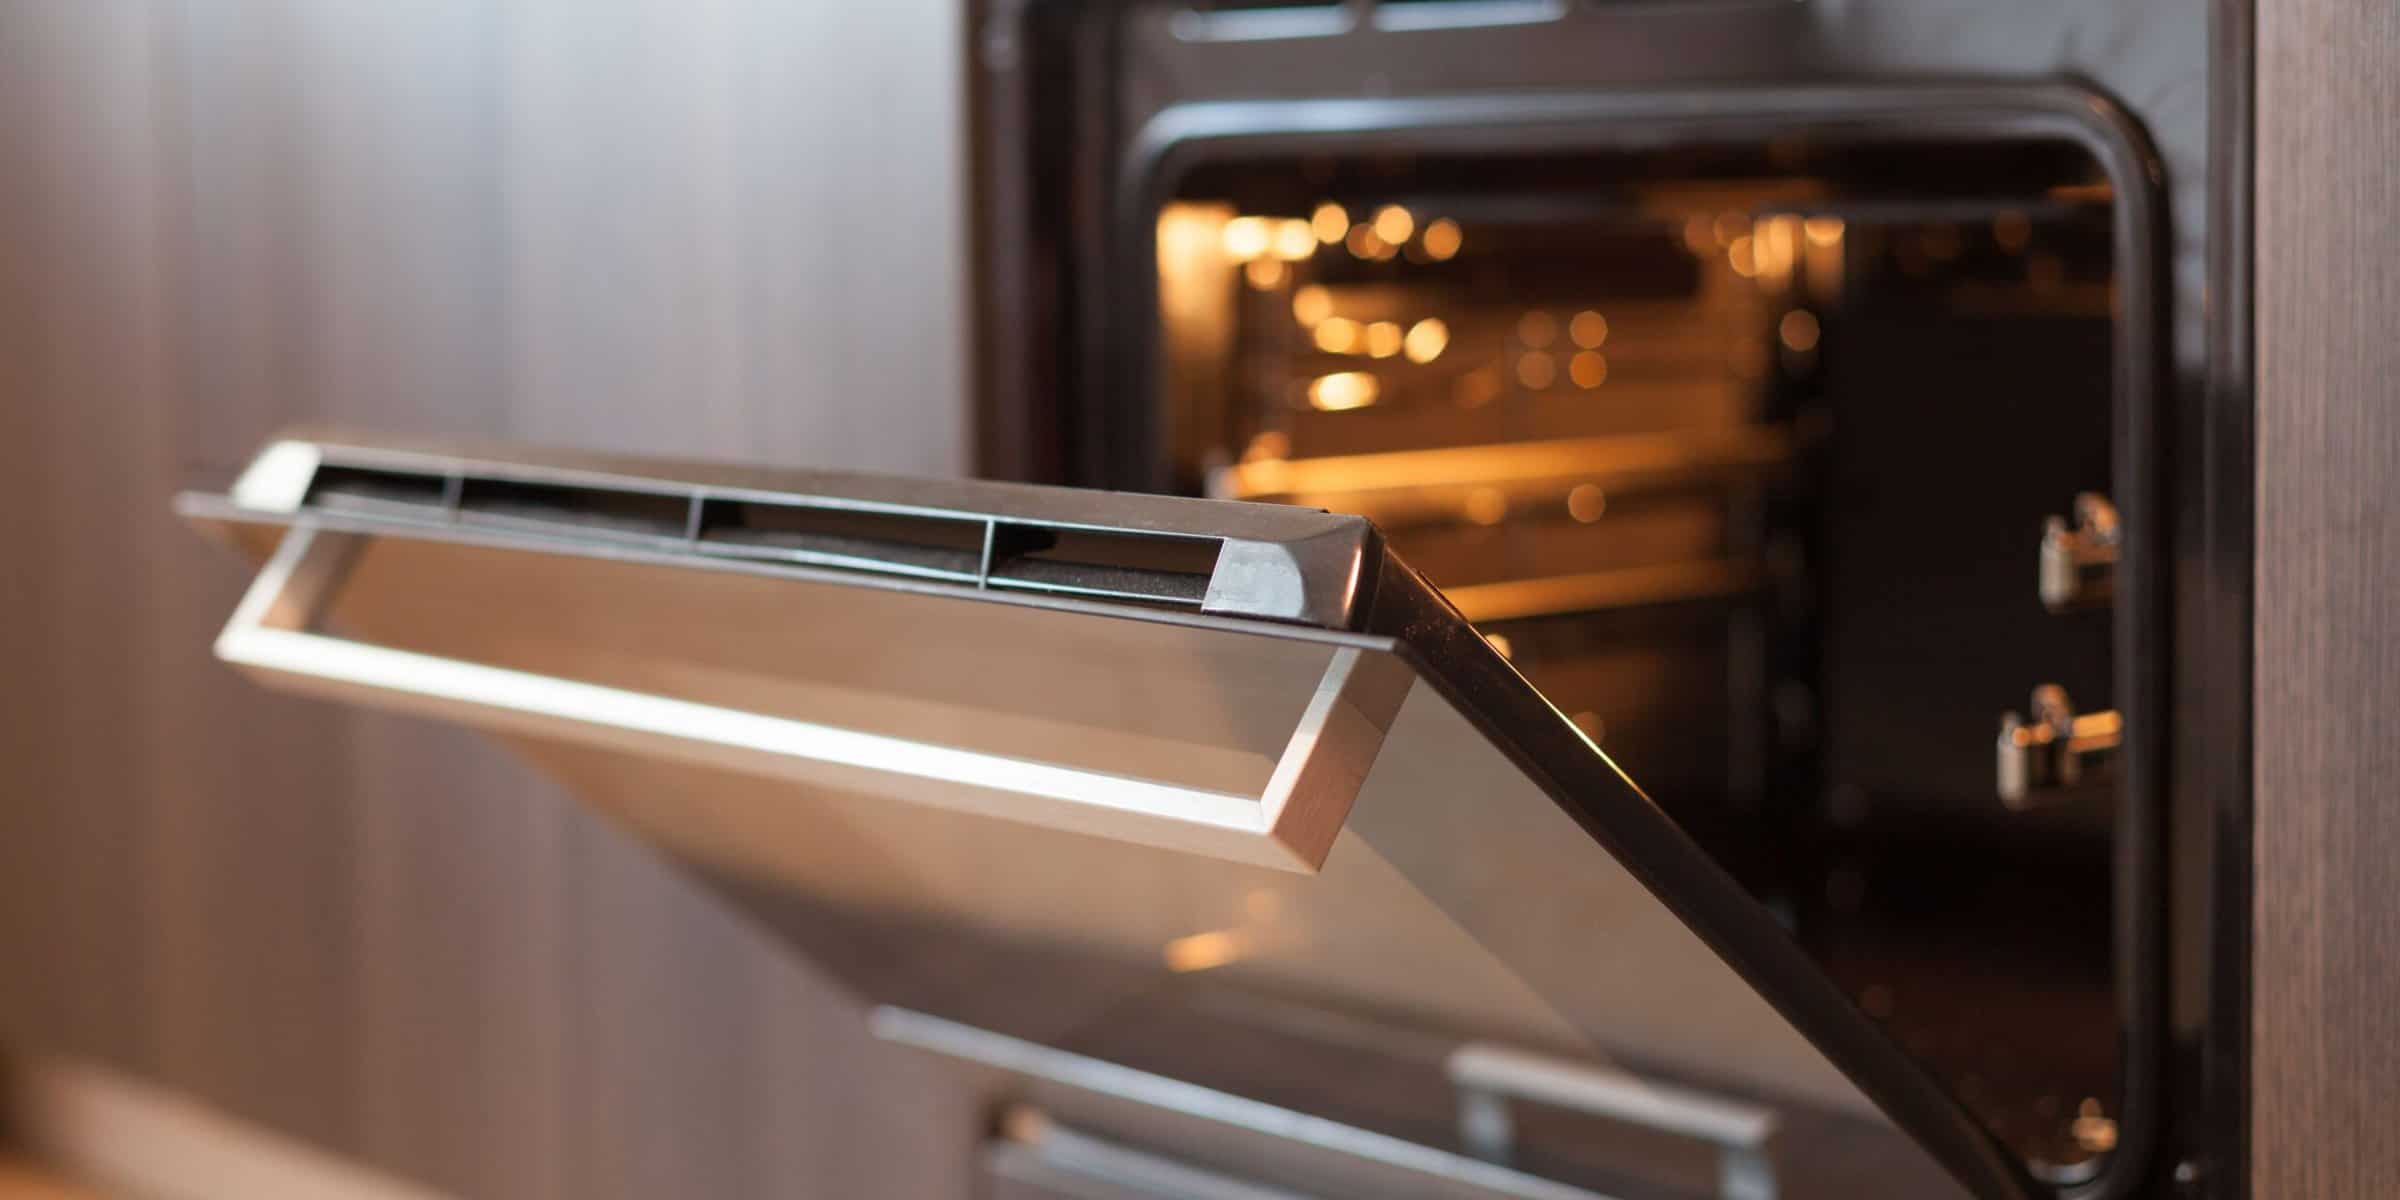 How to Clean a Self-Cleaning Oven Without Using the Self-Cleaning Feature